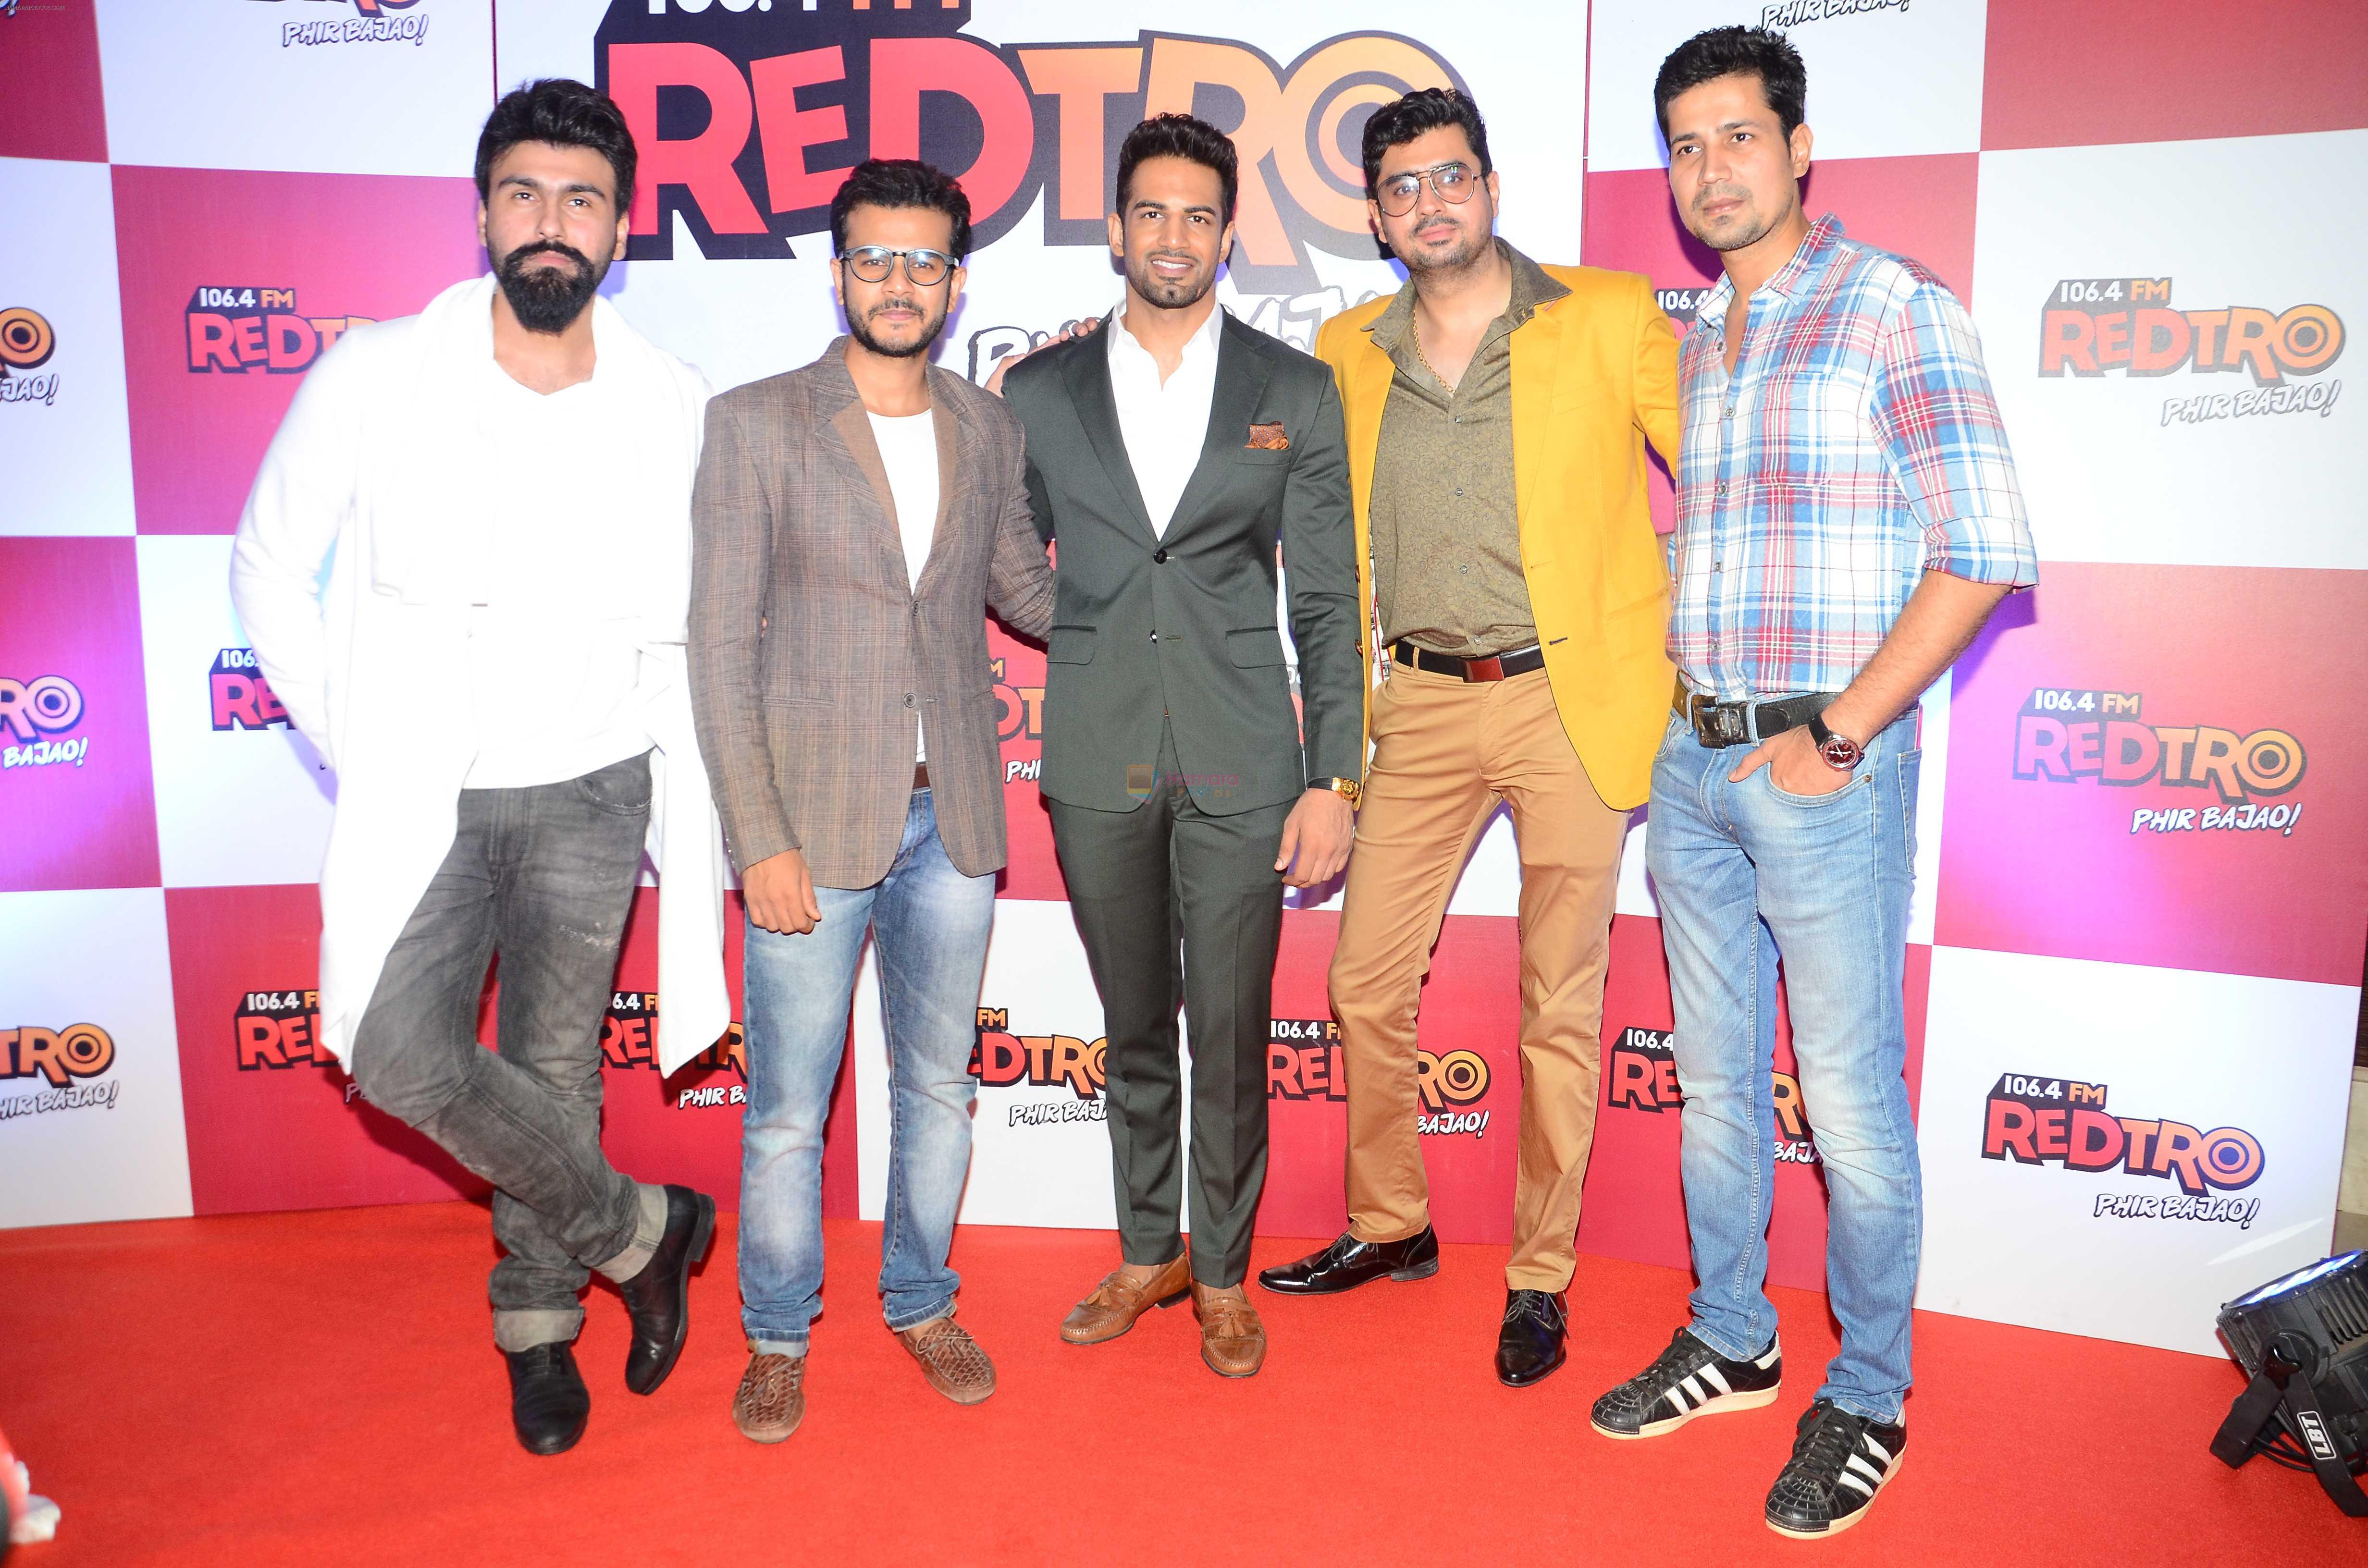 Aarya Babbar, Jay Soni, Sumeet Vyas, Pritam Singh, Upen Patel during the party organised by Red FM to celebrate the launch of its new radio station Redtro 106.4 in Mumbai India on 22 July 2016